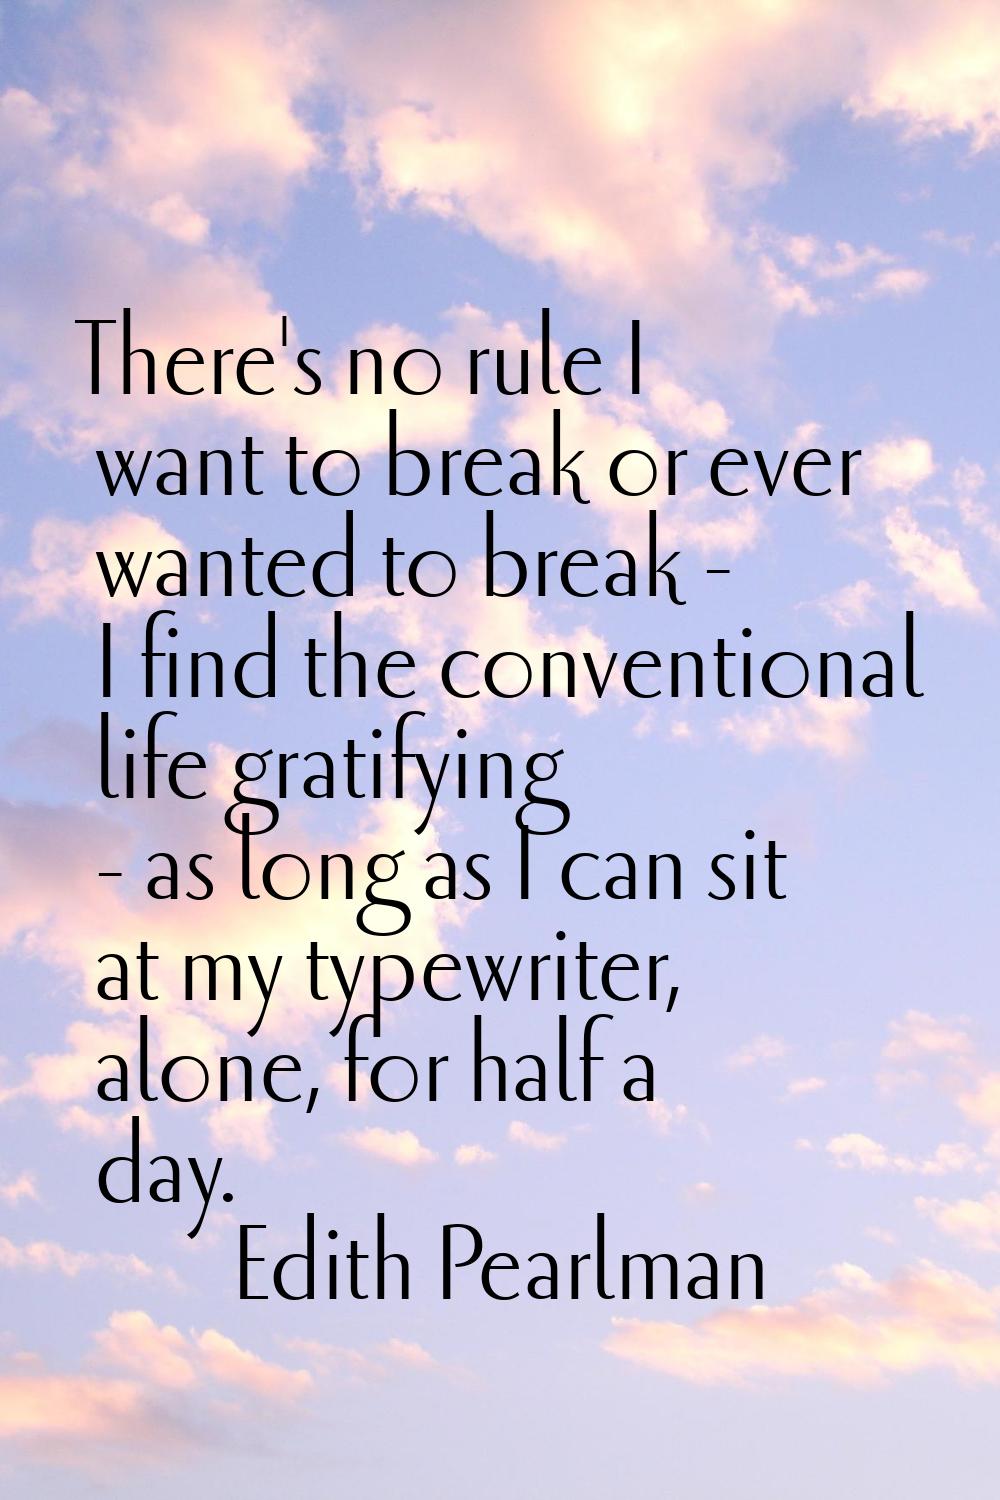 There's no rule I want to break or ever wanted to break - I find the conventional life gratifying -